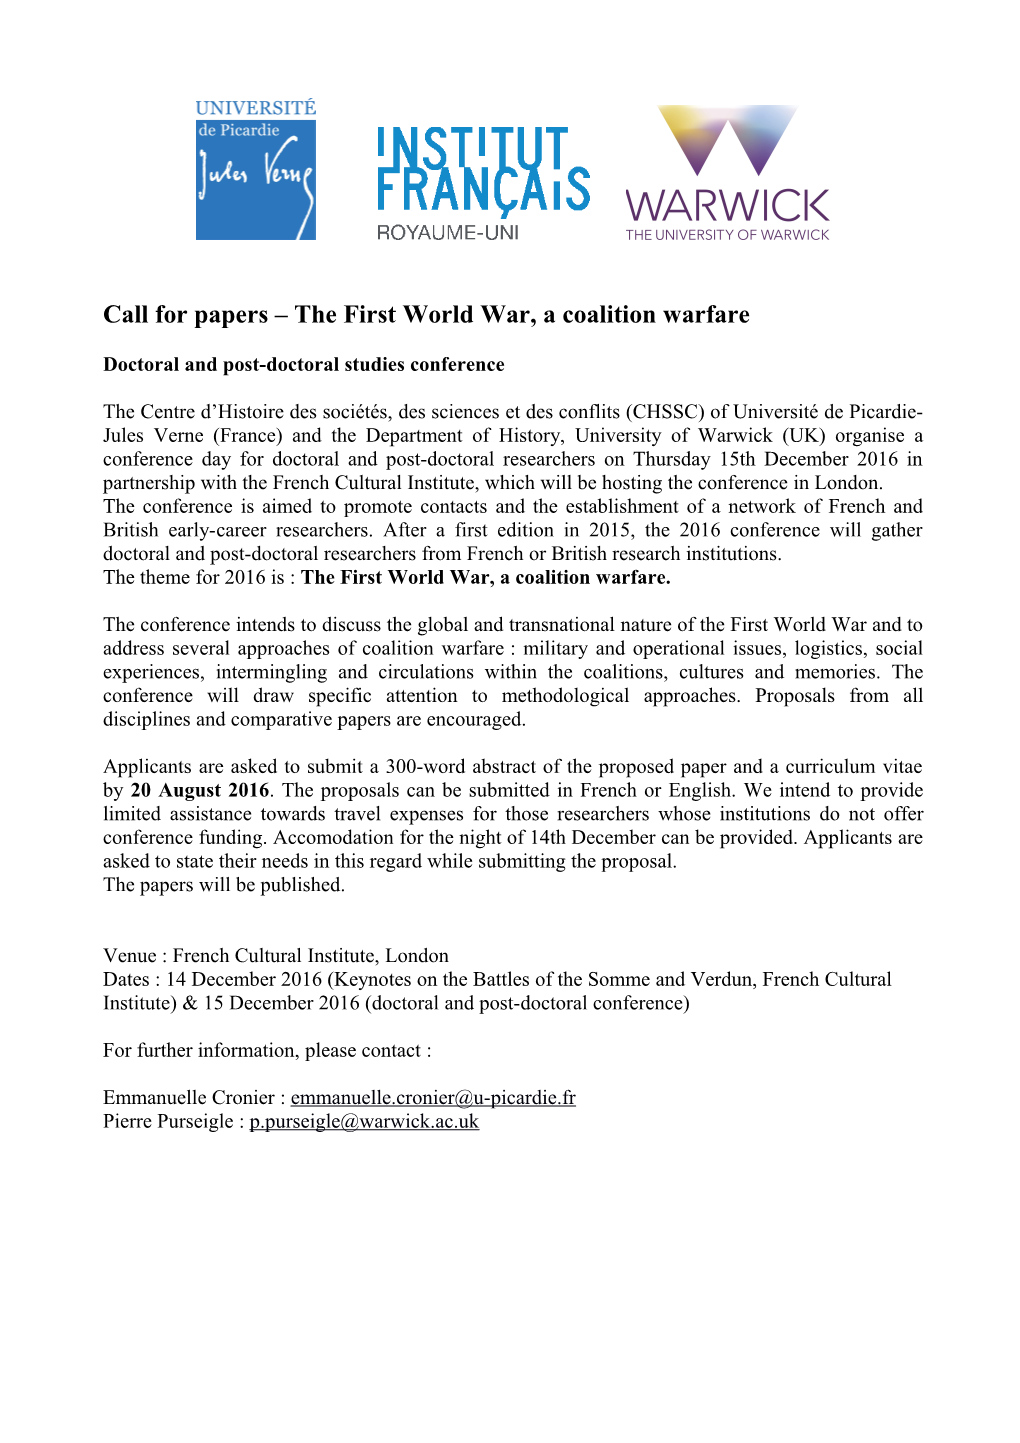 Call for Papers the First World War, a Coalition Warfare